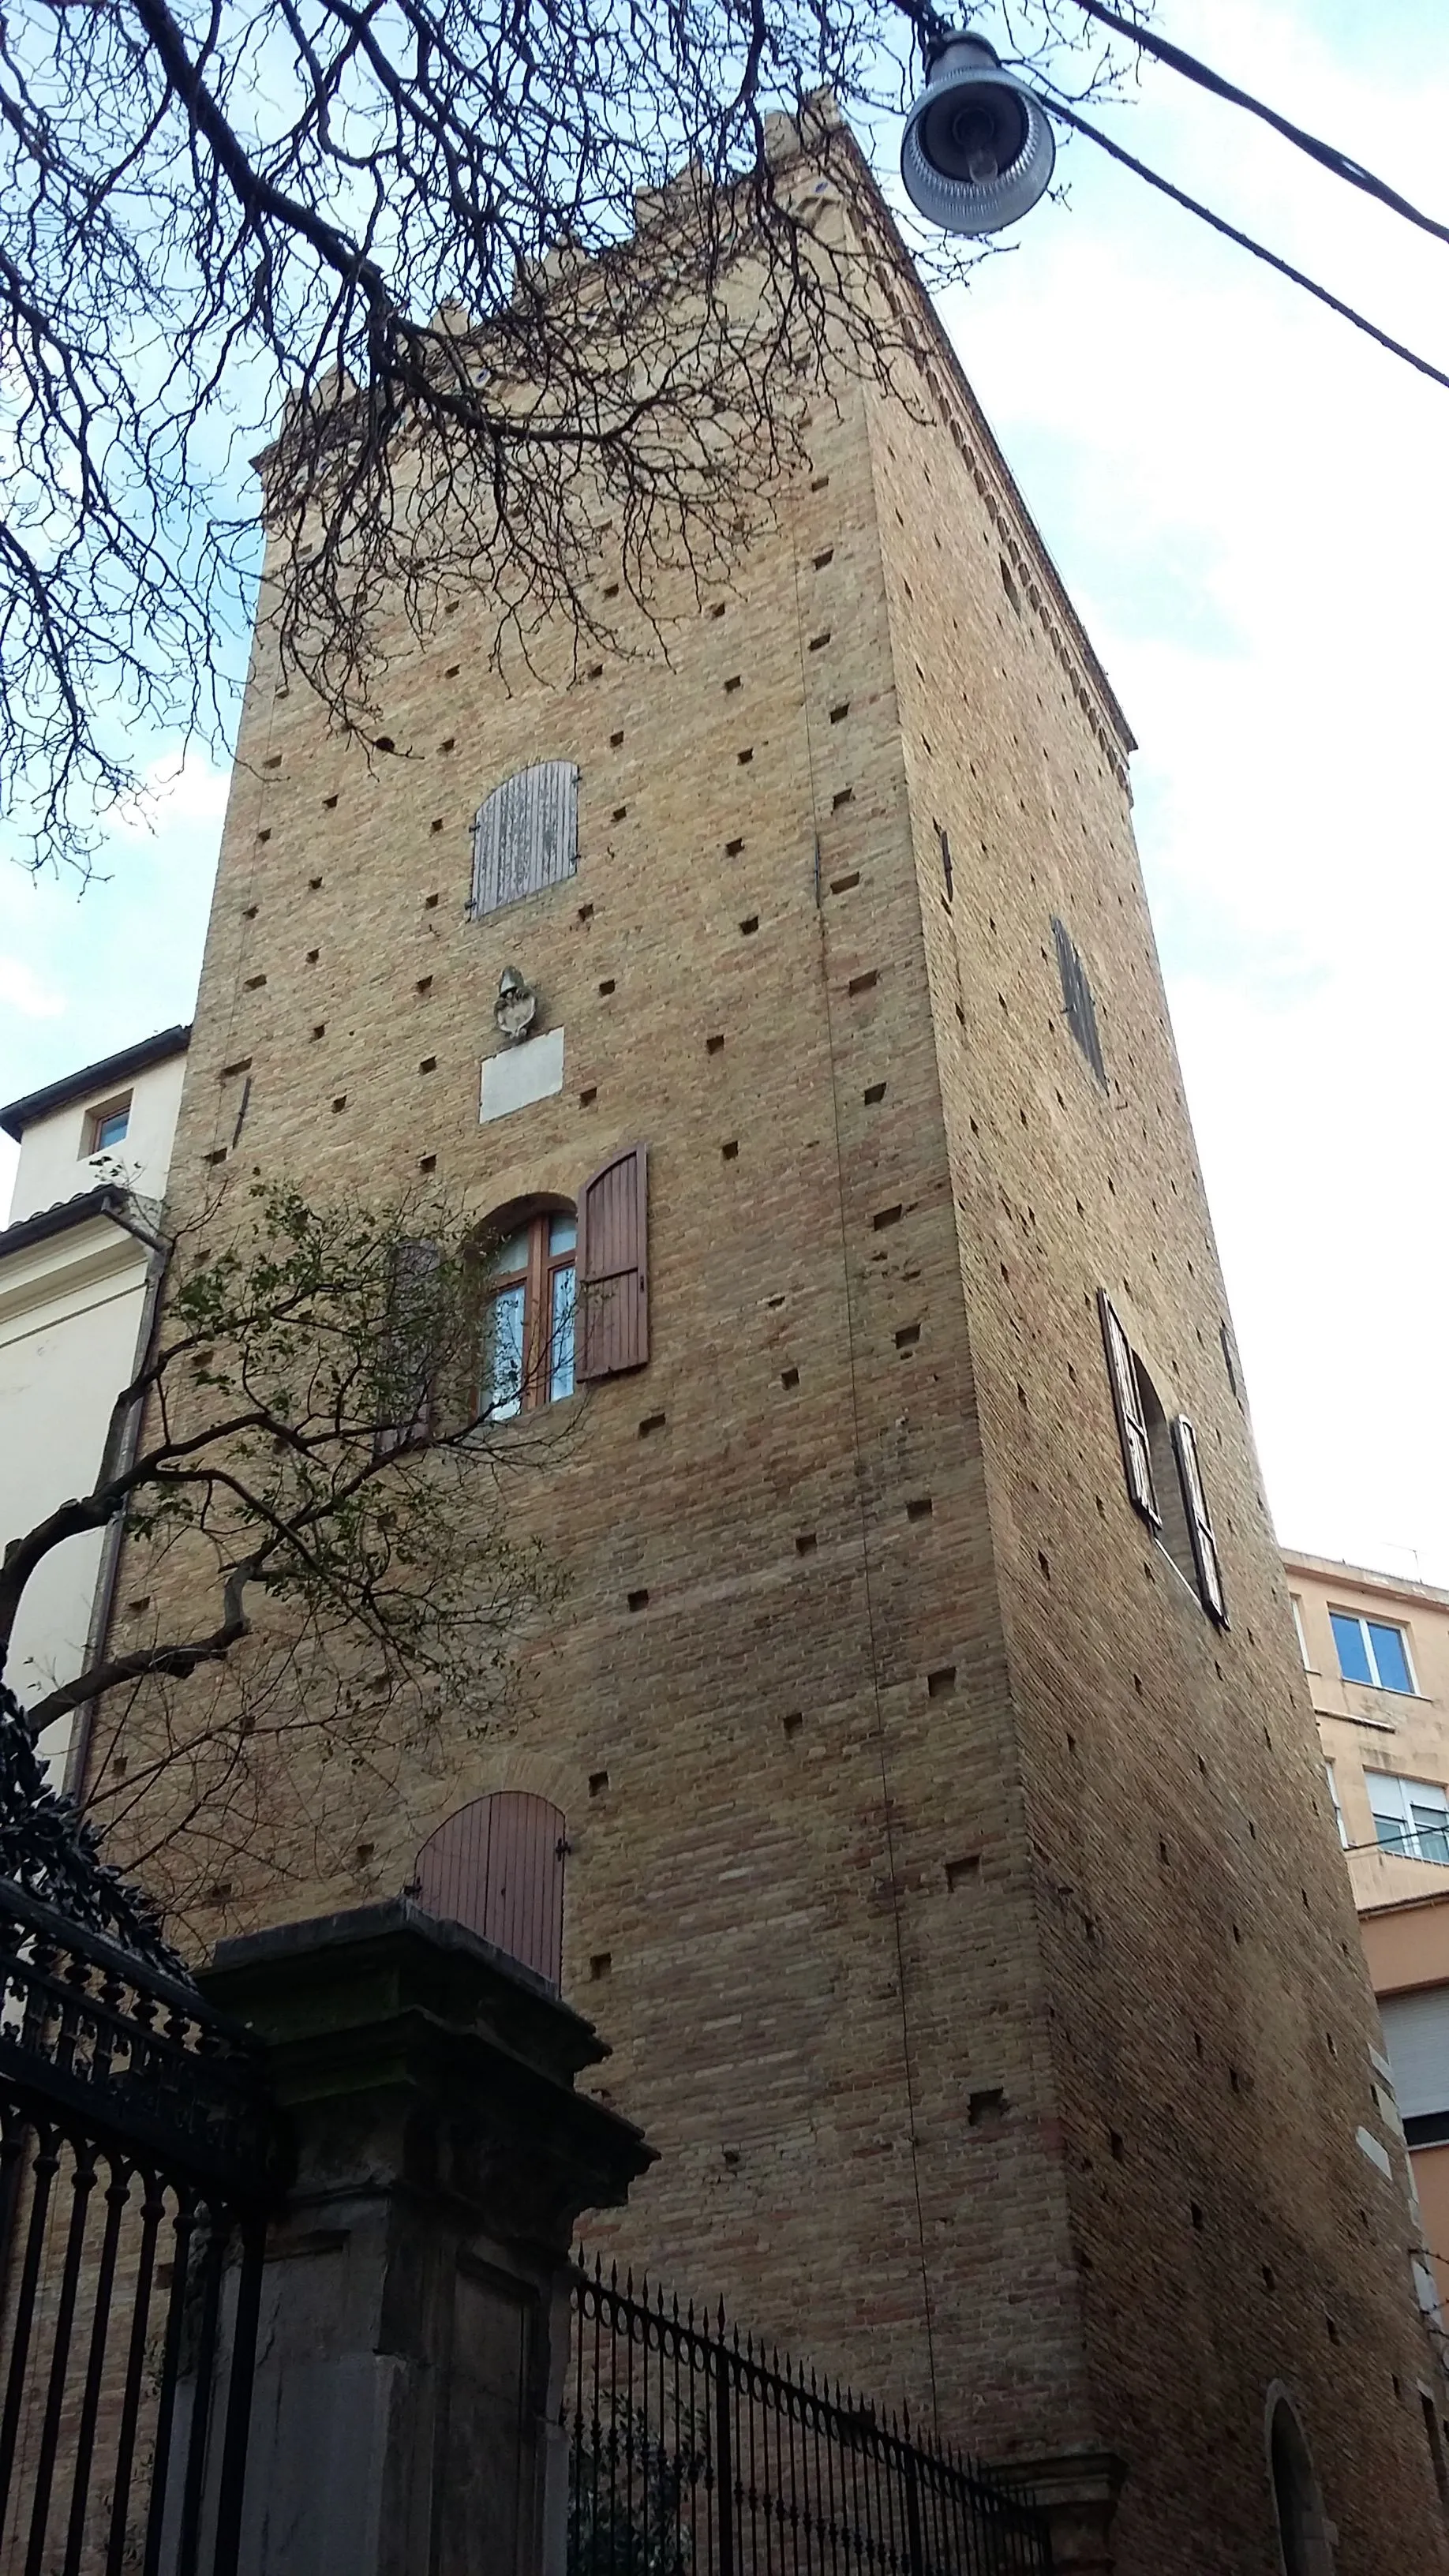 Photo showing: The tower of Archbishop's Palace was built thanks to Colantonio Valignani in 1470.